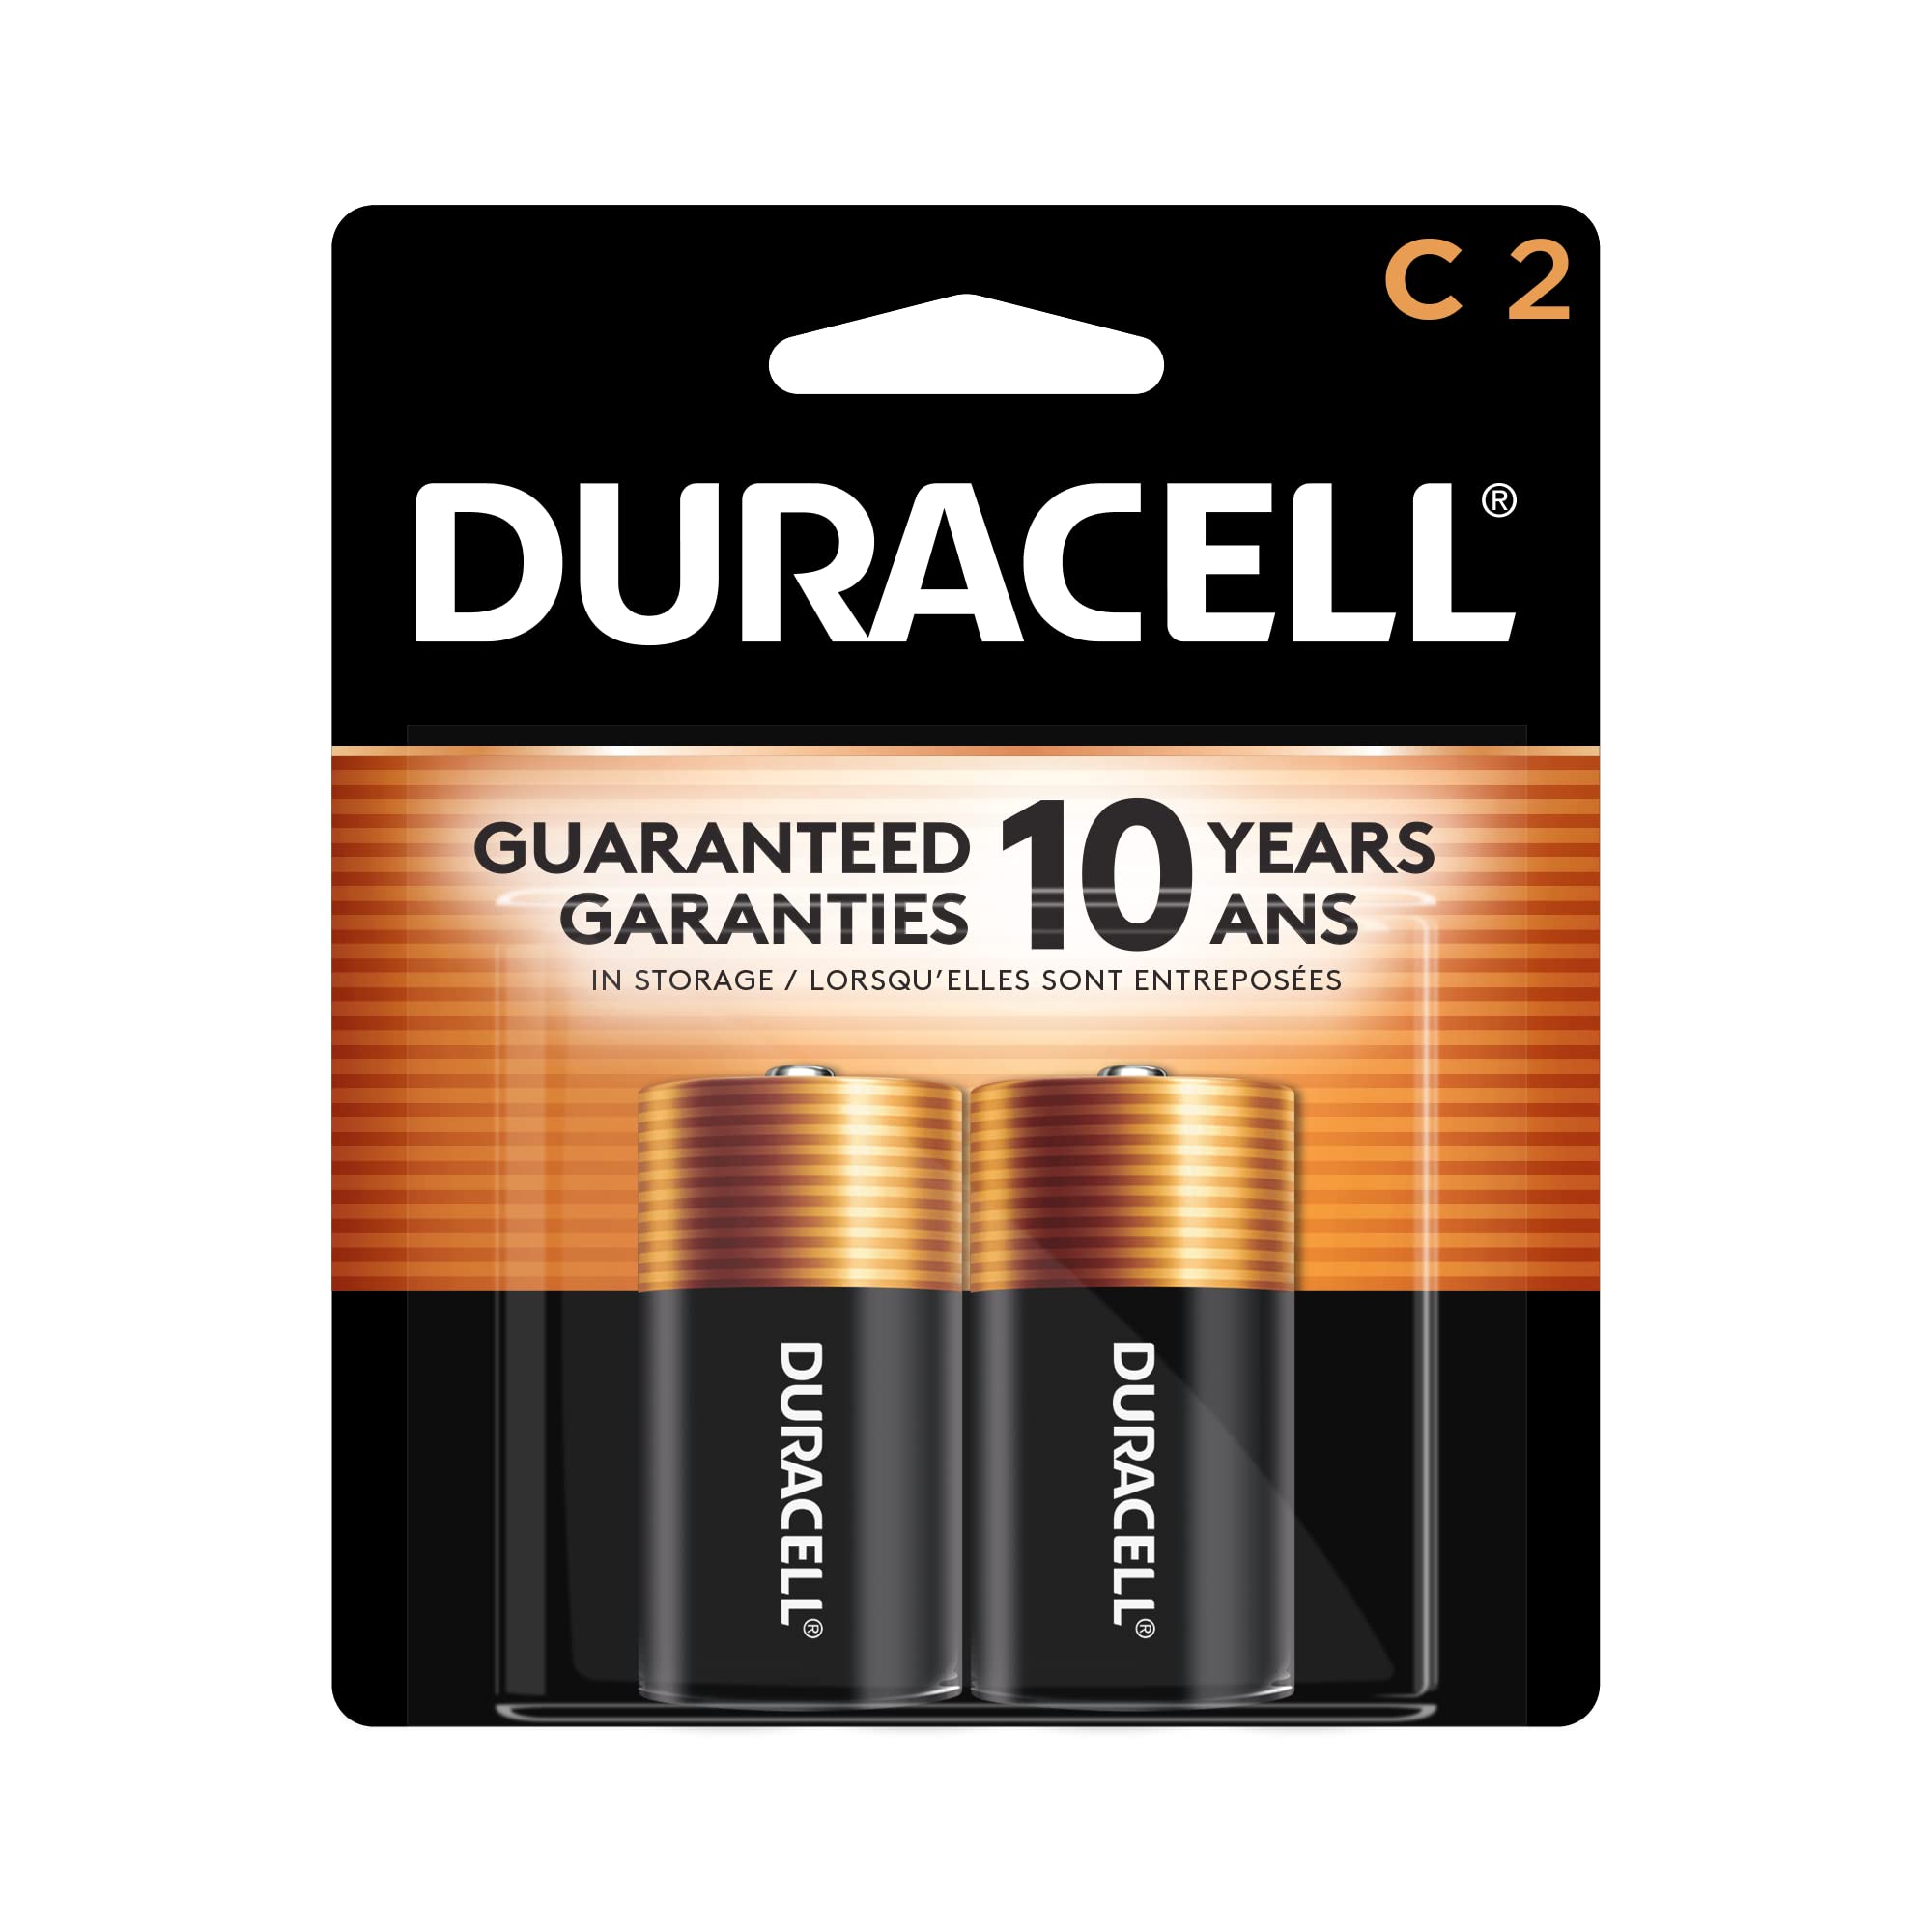 DURACELL Coppertop 1.5V Size C Alkaline Battery, (Pack of 2) - image 1 of 5